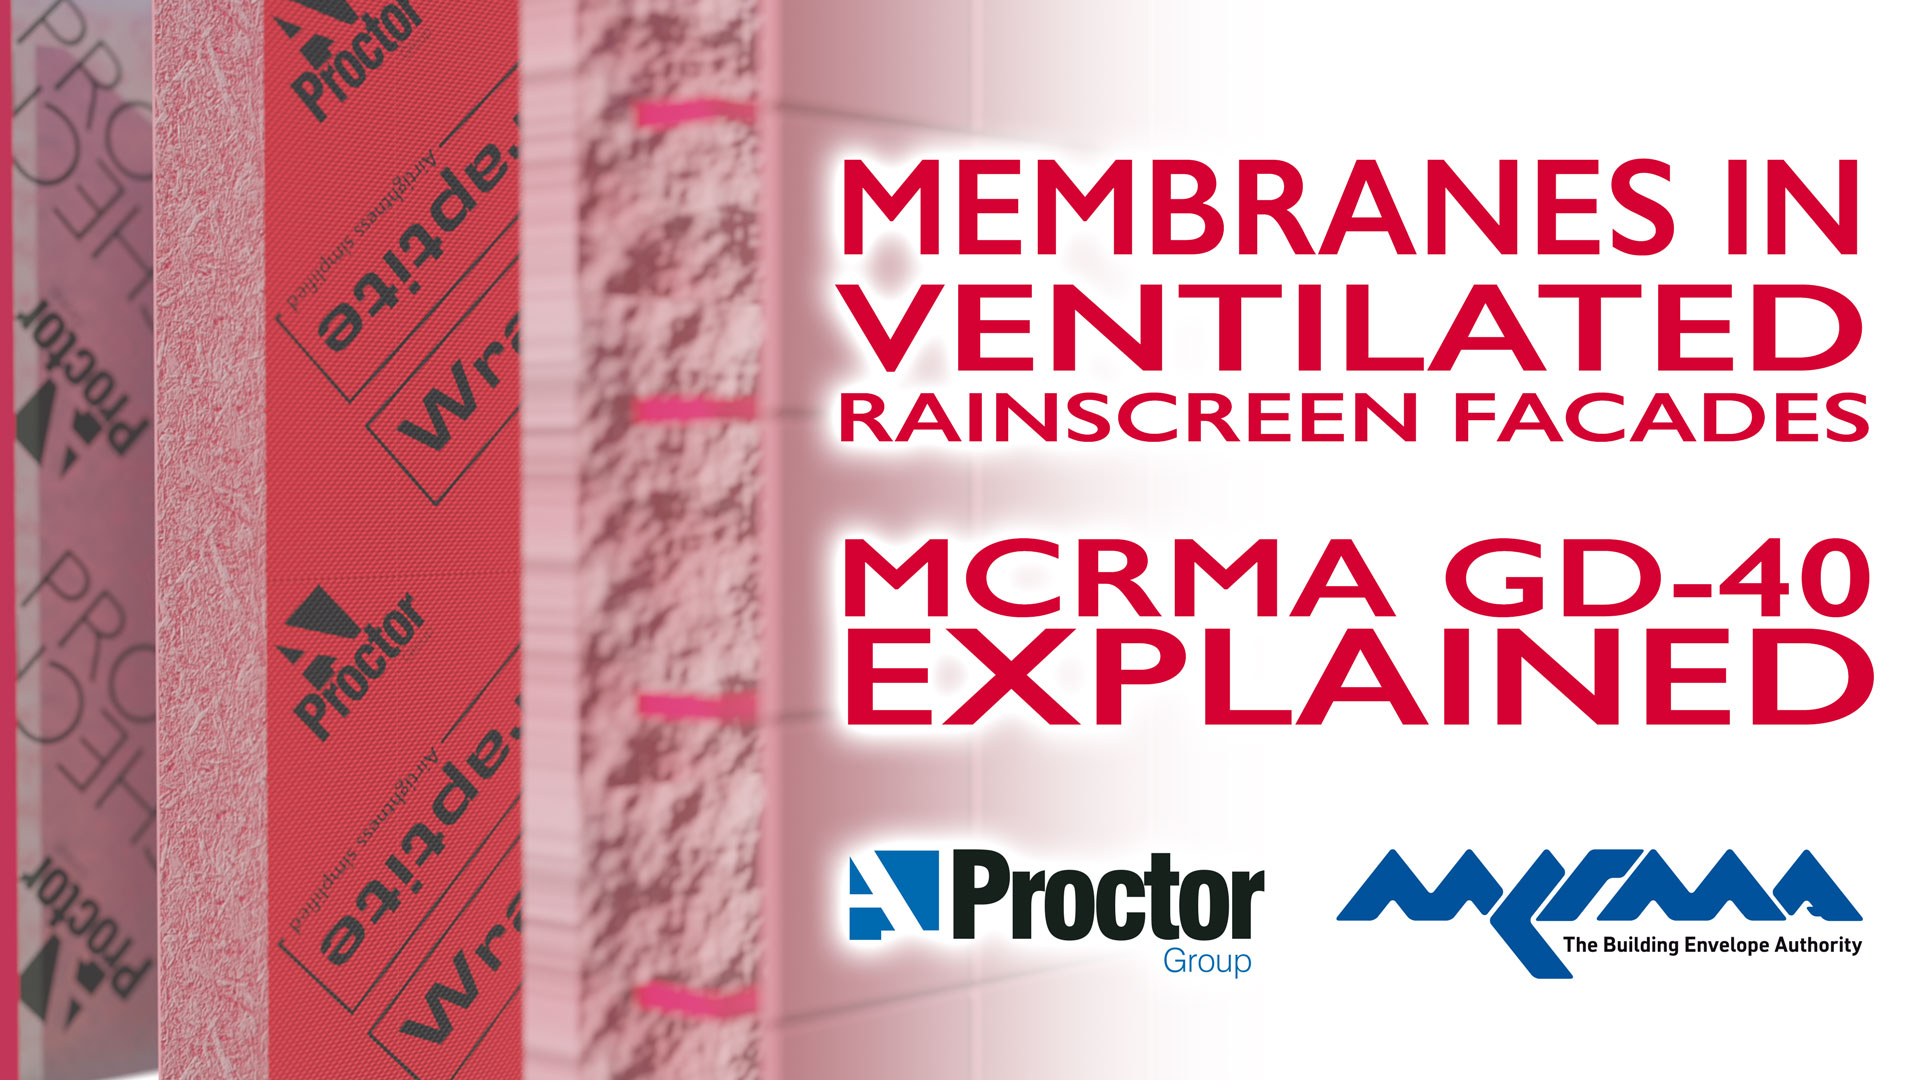 Welcome to our webinar "Understanding Membranes in Ventilated Rainscreen Facades". This webinar introduces and discusses the content of Guidance Document GD40, released this year by the Metal Cladding and Roofing Manufacturers Association.